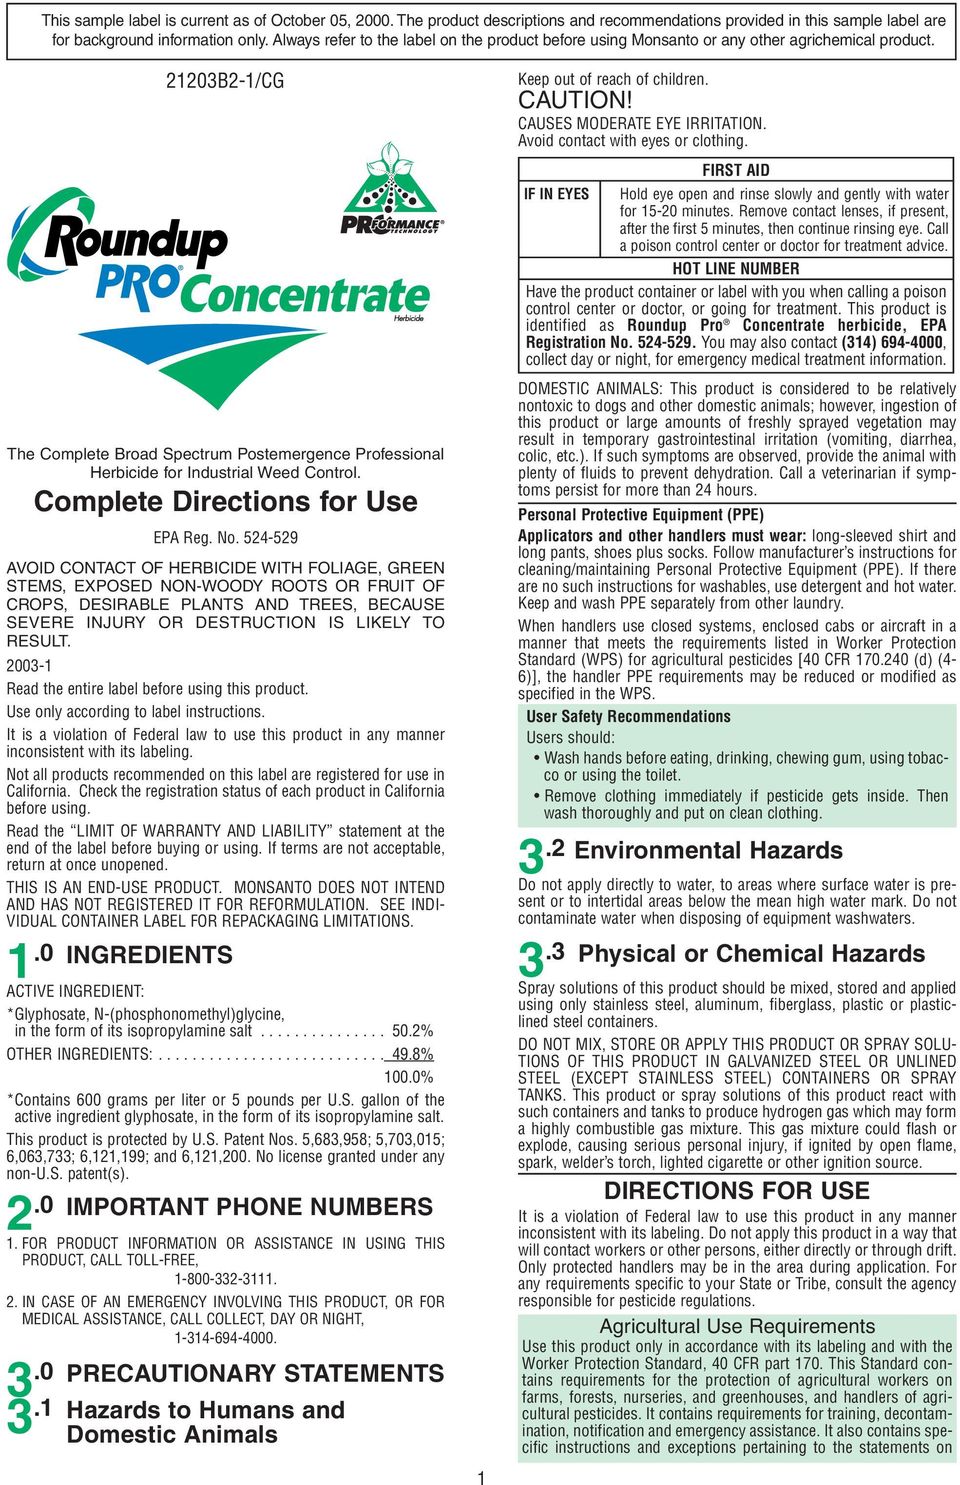 21203B2-1/CG The Complete Broad Spectrum Postemergence Professional Herbicide for Industrial Weed Control. Complete Directions for Use EPA Reg. No.